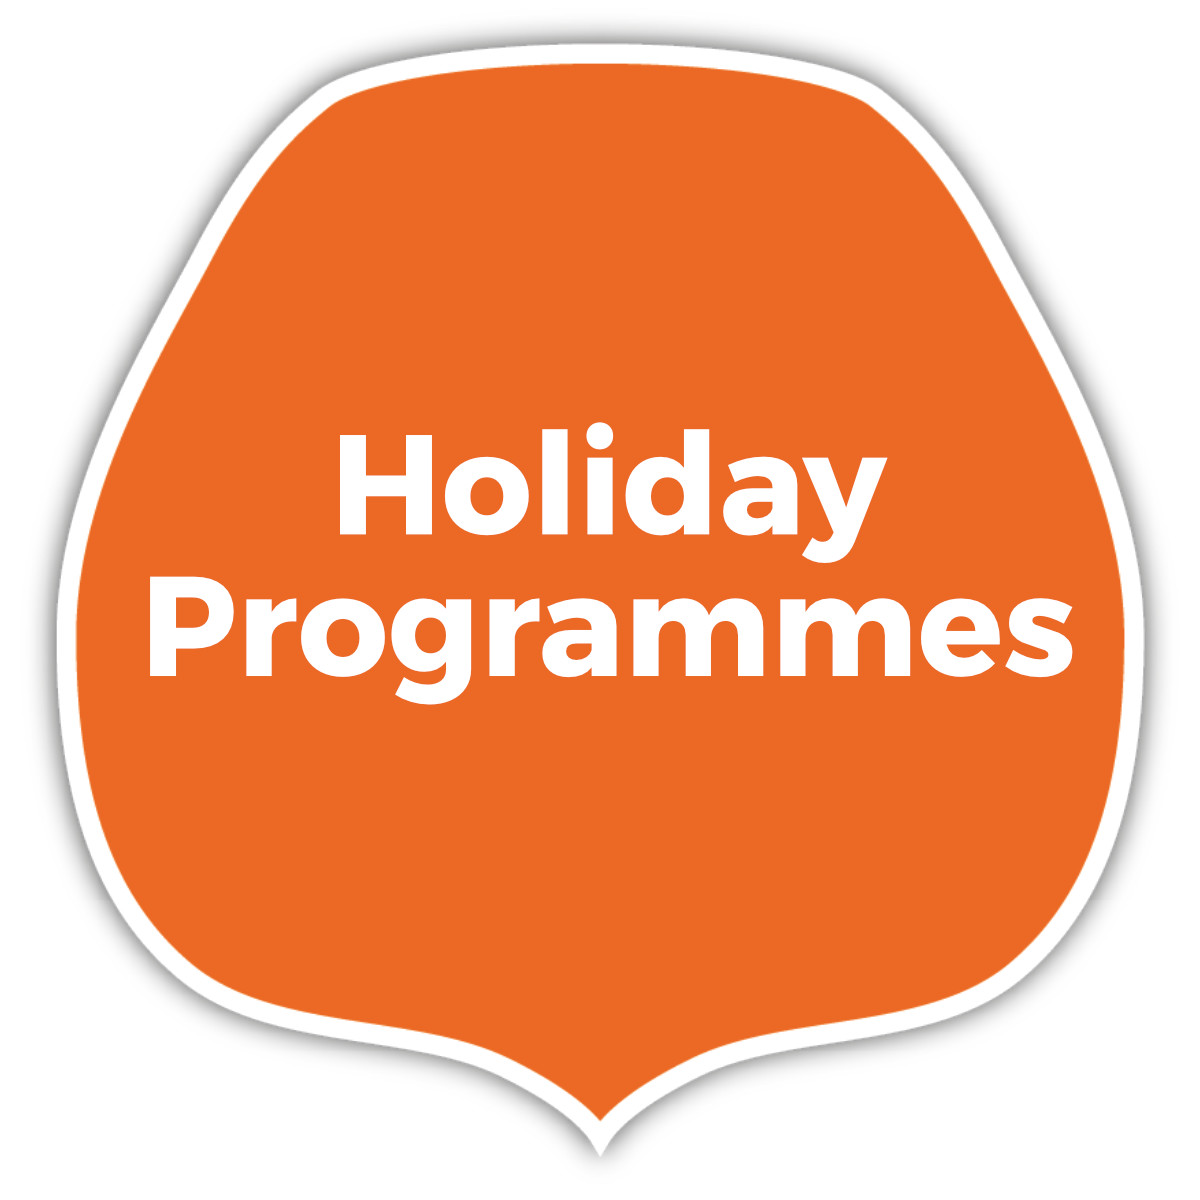 Holiday Programmes Button